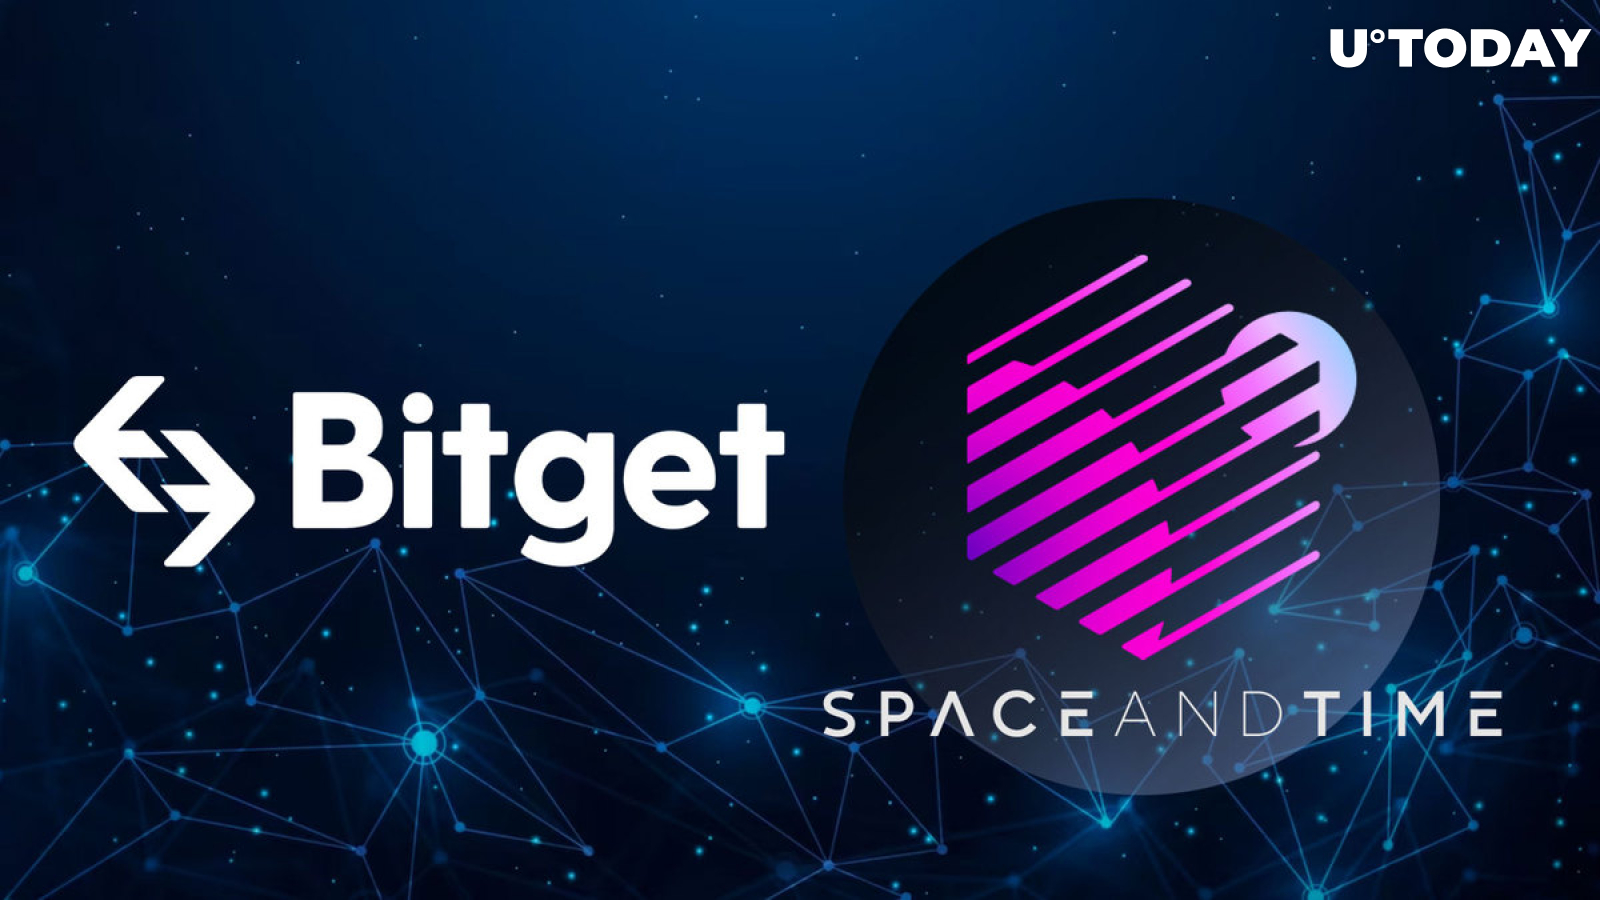 Bitget Scores Partnership With Space and Time for Better Financial Transparency